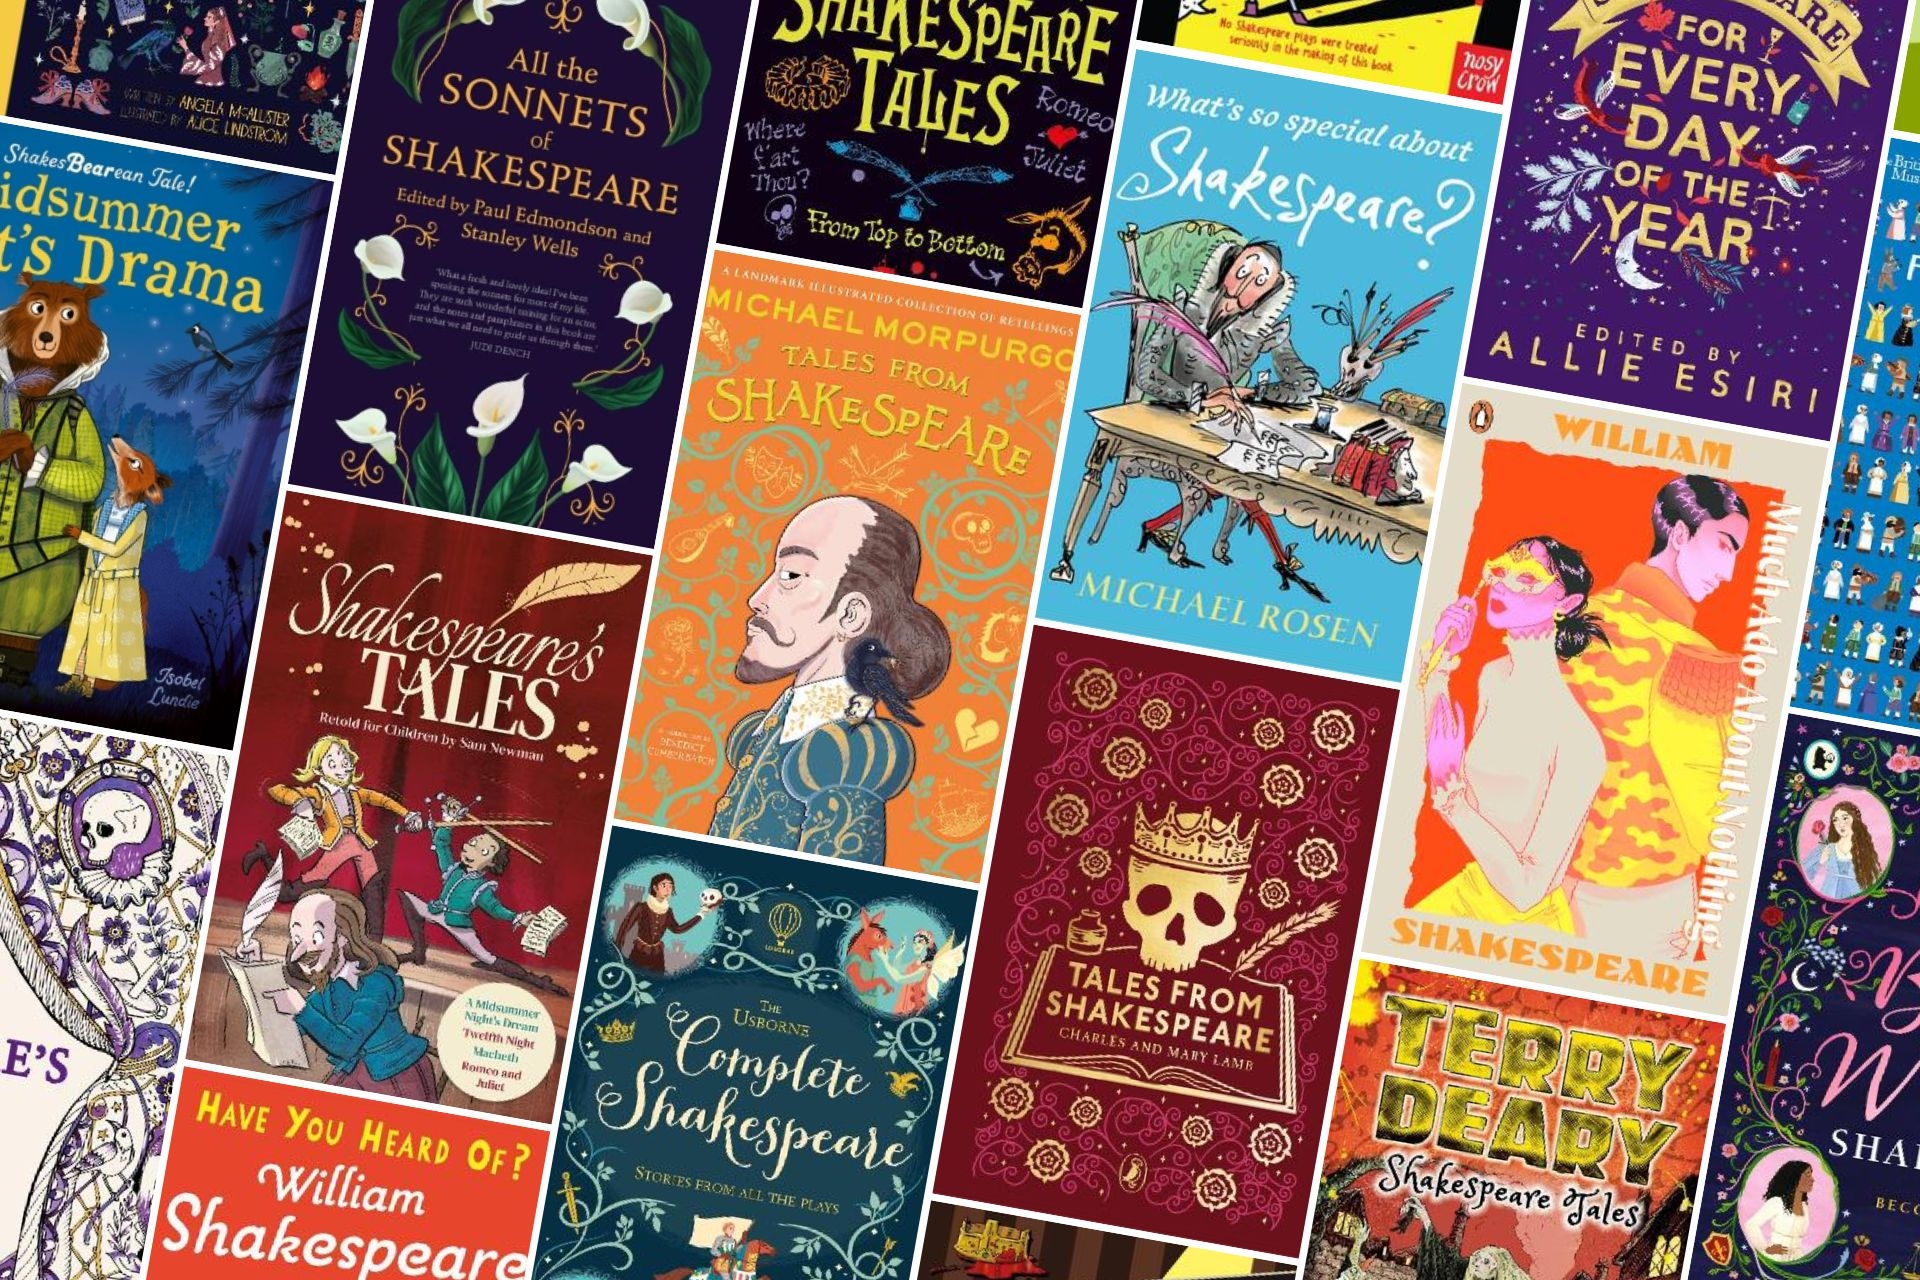 460 Years After His Birth - 25 Children's Books About Shakespeare